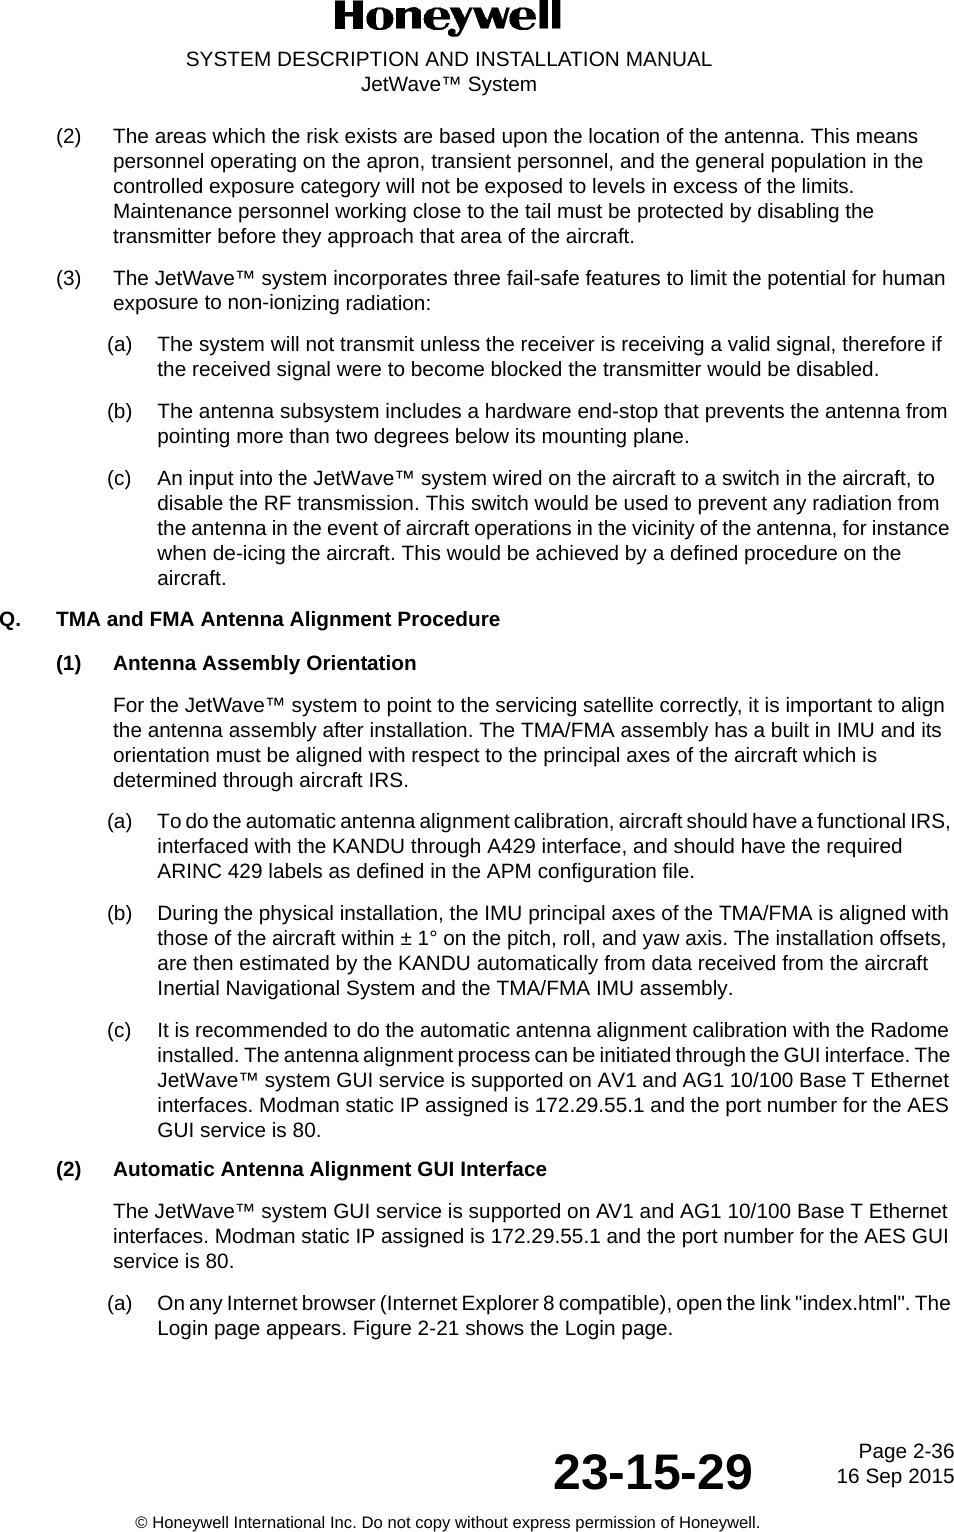 Page 2-36 16 Sep 201523-15-29SYSTEM DESCRIPTION AND INSTALLATION MANUALJetWave™ System© Honeywell International Inc. Do not copy without express permission of Honeywell.(2) The areas which the risk exists are based upon the location of the antenna. This means personnel operating on the apron, transient personnel, and the general population in the controlled exposure category will not be exposed to levels in excess of the limits. Maintenance personnel working close to the tail must be protected by disabling the transmitter before they approach that area of the aircraft.(3) The JetWave™ system incorporates three fail-safe features to limit the potential for human exposure to non-ionizing radiation: (a) The system will not transmit unless the receiver is receiving a valid signal, therefore if the received signal were to become blocked the transmitter would be disabled.(b) The antenna subsystem includes a hardware end-stop that prevents the antenna from pointing more than two degrees below its mounting plane. (c) An input into the JetWave™ system wired on the aircraft to a switch in the aircraft, to disable the RF transmission. This switch would be used to prevent any radiation from the antenna in the event of aircraft operations in the vicinity of the antenna, for instance when de-icing the aircraft. This would be achieved by a defined procedure on the aircraft.Q. TMA and FMA Antenna Alignment Procedure(1) Antenna Assembly OrientationFor the JetWave™ system to point to the servicing satellite correctly, it is important to align the antenna assembly after installation. The TMA/FMA assembly has a built in IMU and its orientation must be aligned with respect to the principal axes of the aircraft which is determined through aircraft IRS.(a) To do the automatic antenna alignment calibration, aircraft should have a functional IRS, interfaced with the KANDU through A429 interface, and should have the required ARINC 429 labels as defined in the APM configuration file. (b) During the physical installation, the IMU principal axes of the TMA/FMA is aligned with those of the aircraft within ± 1° on the pitch, roll, and yaw axis. The installation offsets, are then estimated by the KANDU automatically from data received from the aircraft Inertial Navigational System and the TMA/FMA IMU assembly. (c) It is recommended to do the automatic antenna alignment calibration with the Radome installed. The antenna alignment process can be initiated through the GUI interface. The JetWave™ system GUI service is supported on AV1 and AG1 10/100 Base T Ethernet interfaces. Modman static IP assigned is 172.29.55.1 and the port number for the AES GUI service is 80. (2) Automatic Antenna Alignment GUI InterfaceThe JetWave™ system GUI service is supported on AV1 and AG1 10/100 Base T Ethernet interfaces. Modman static IP assigned is 172.29.55.1 and the port number for the AES GUI service is 80. (a) On any Internet browser (Internet Explorer 8 compatible), open the link &quot;index.html&quot;. The Login page appears. Figure 2-21 shows the Login page. 